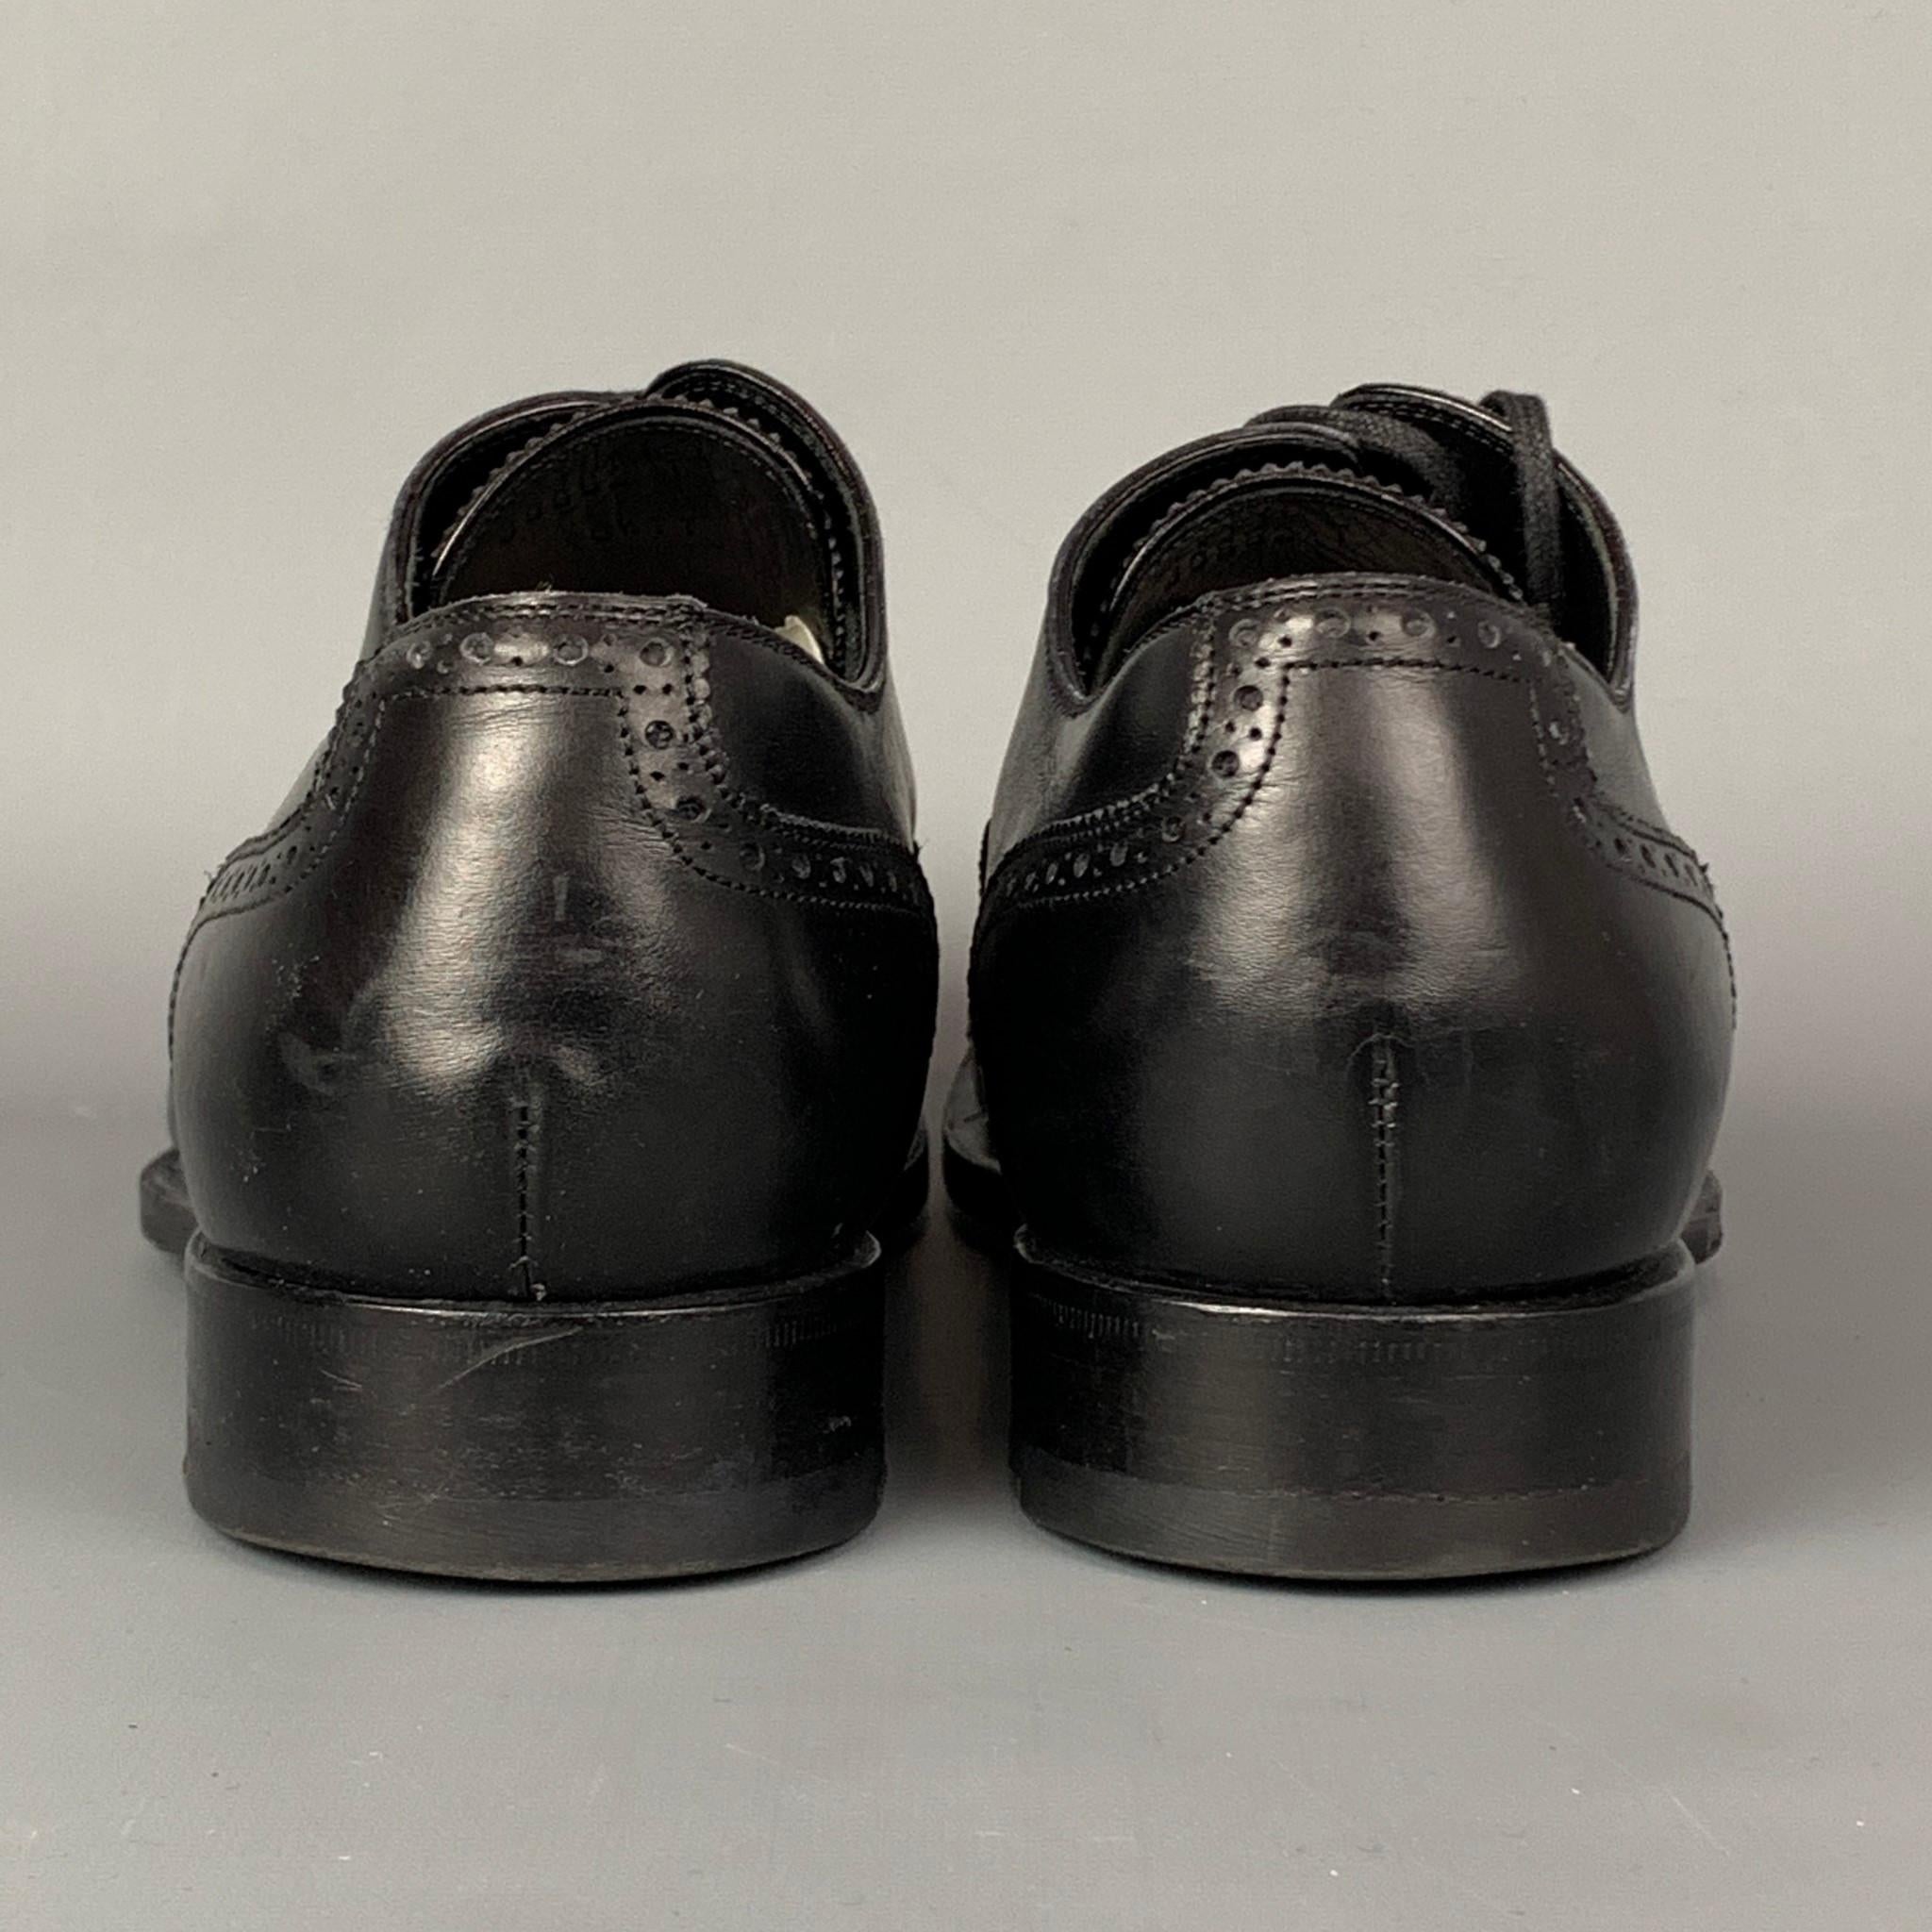 TOM FORD Edward Size 10.5 Black Perforated Leather Cap Toe Lace Up Shoes 1